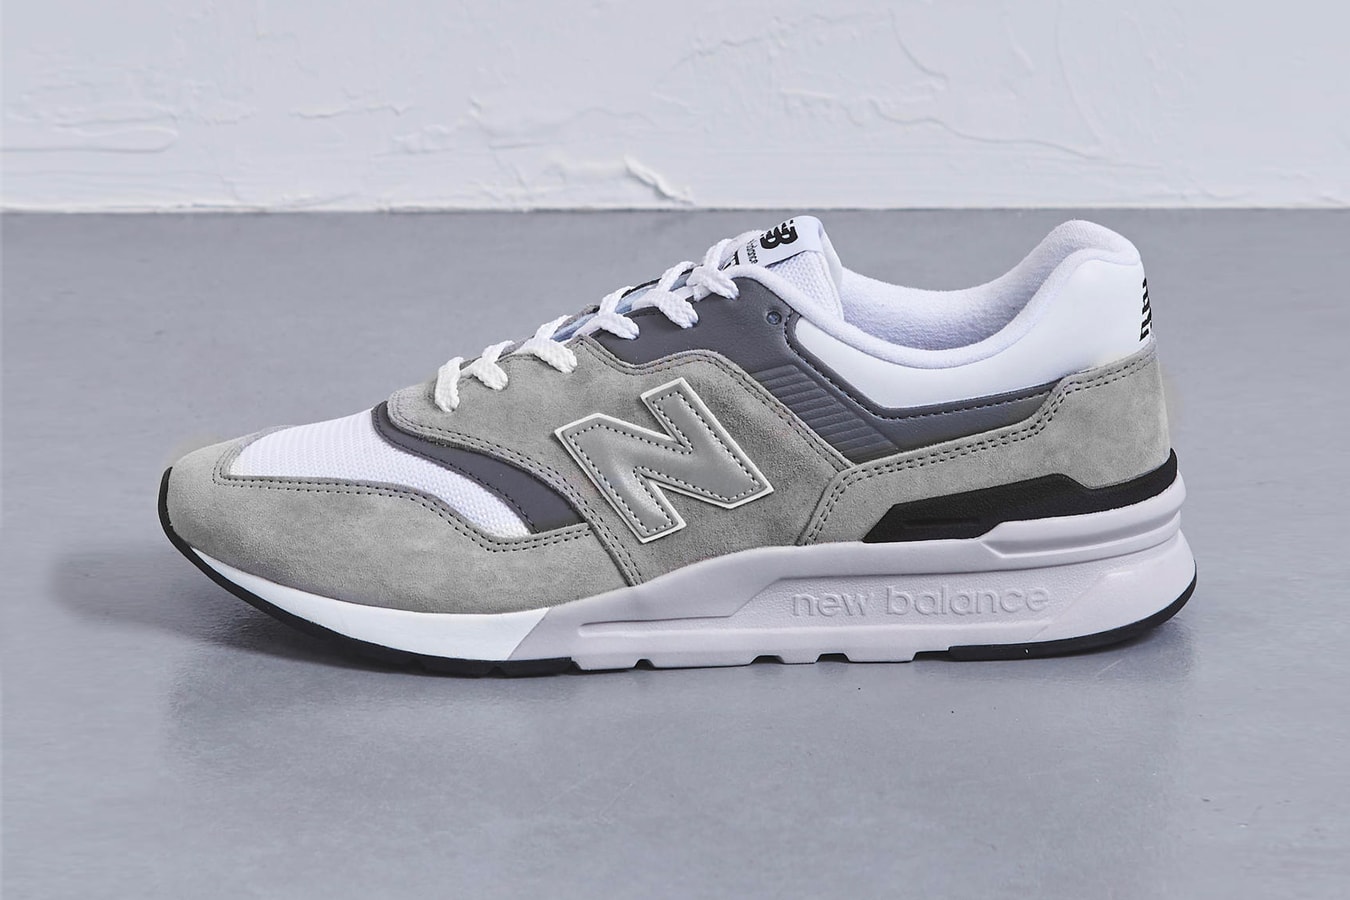 New Balance 997H Receives a United Arrows Upgrade white grey drop release date preorder link images price footwear 